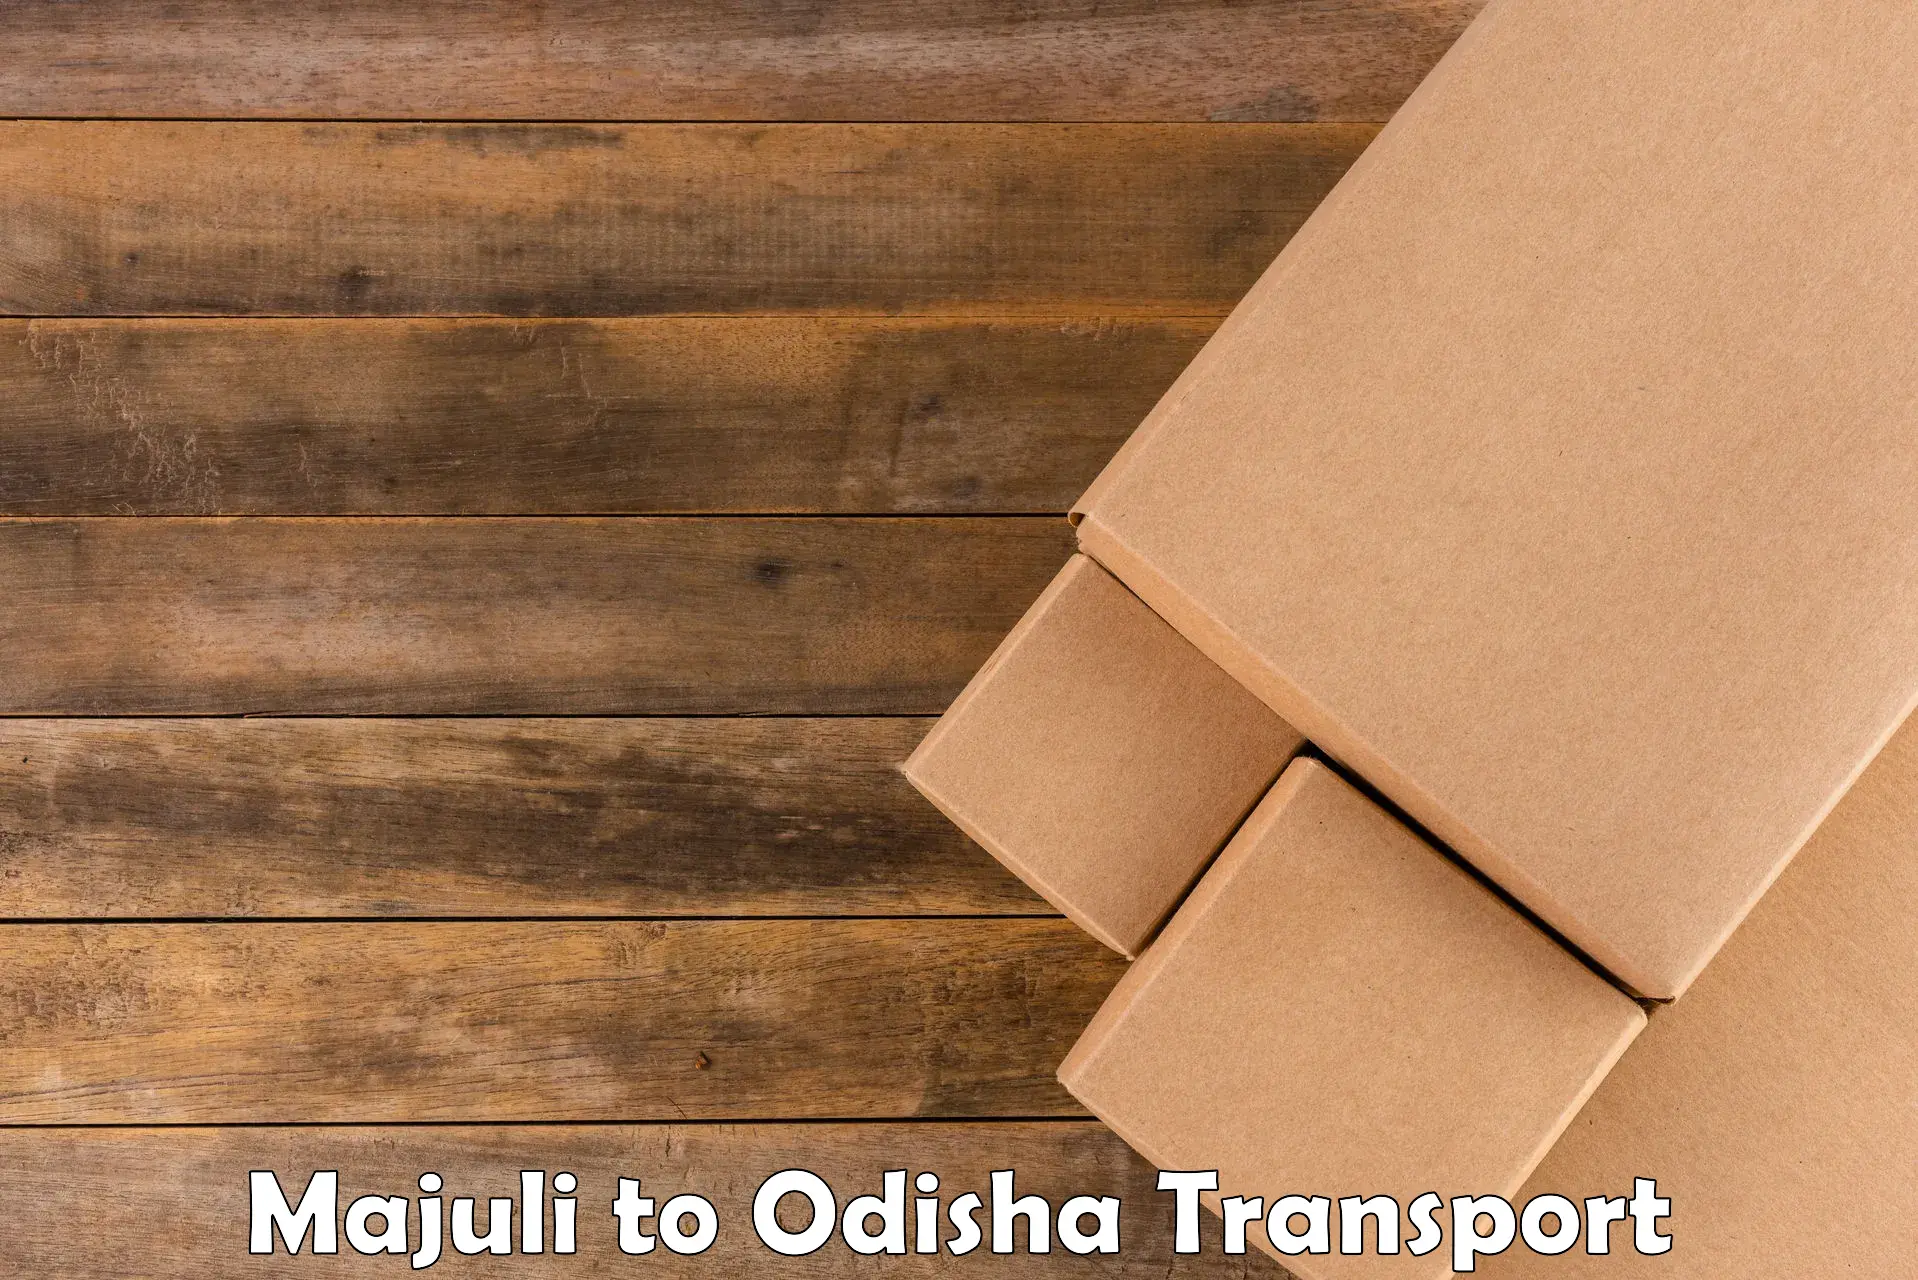 Transport bike from one state to another Majuli to Odisha